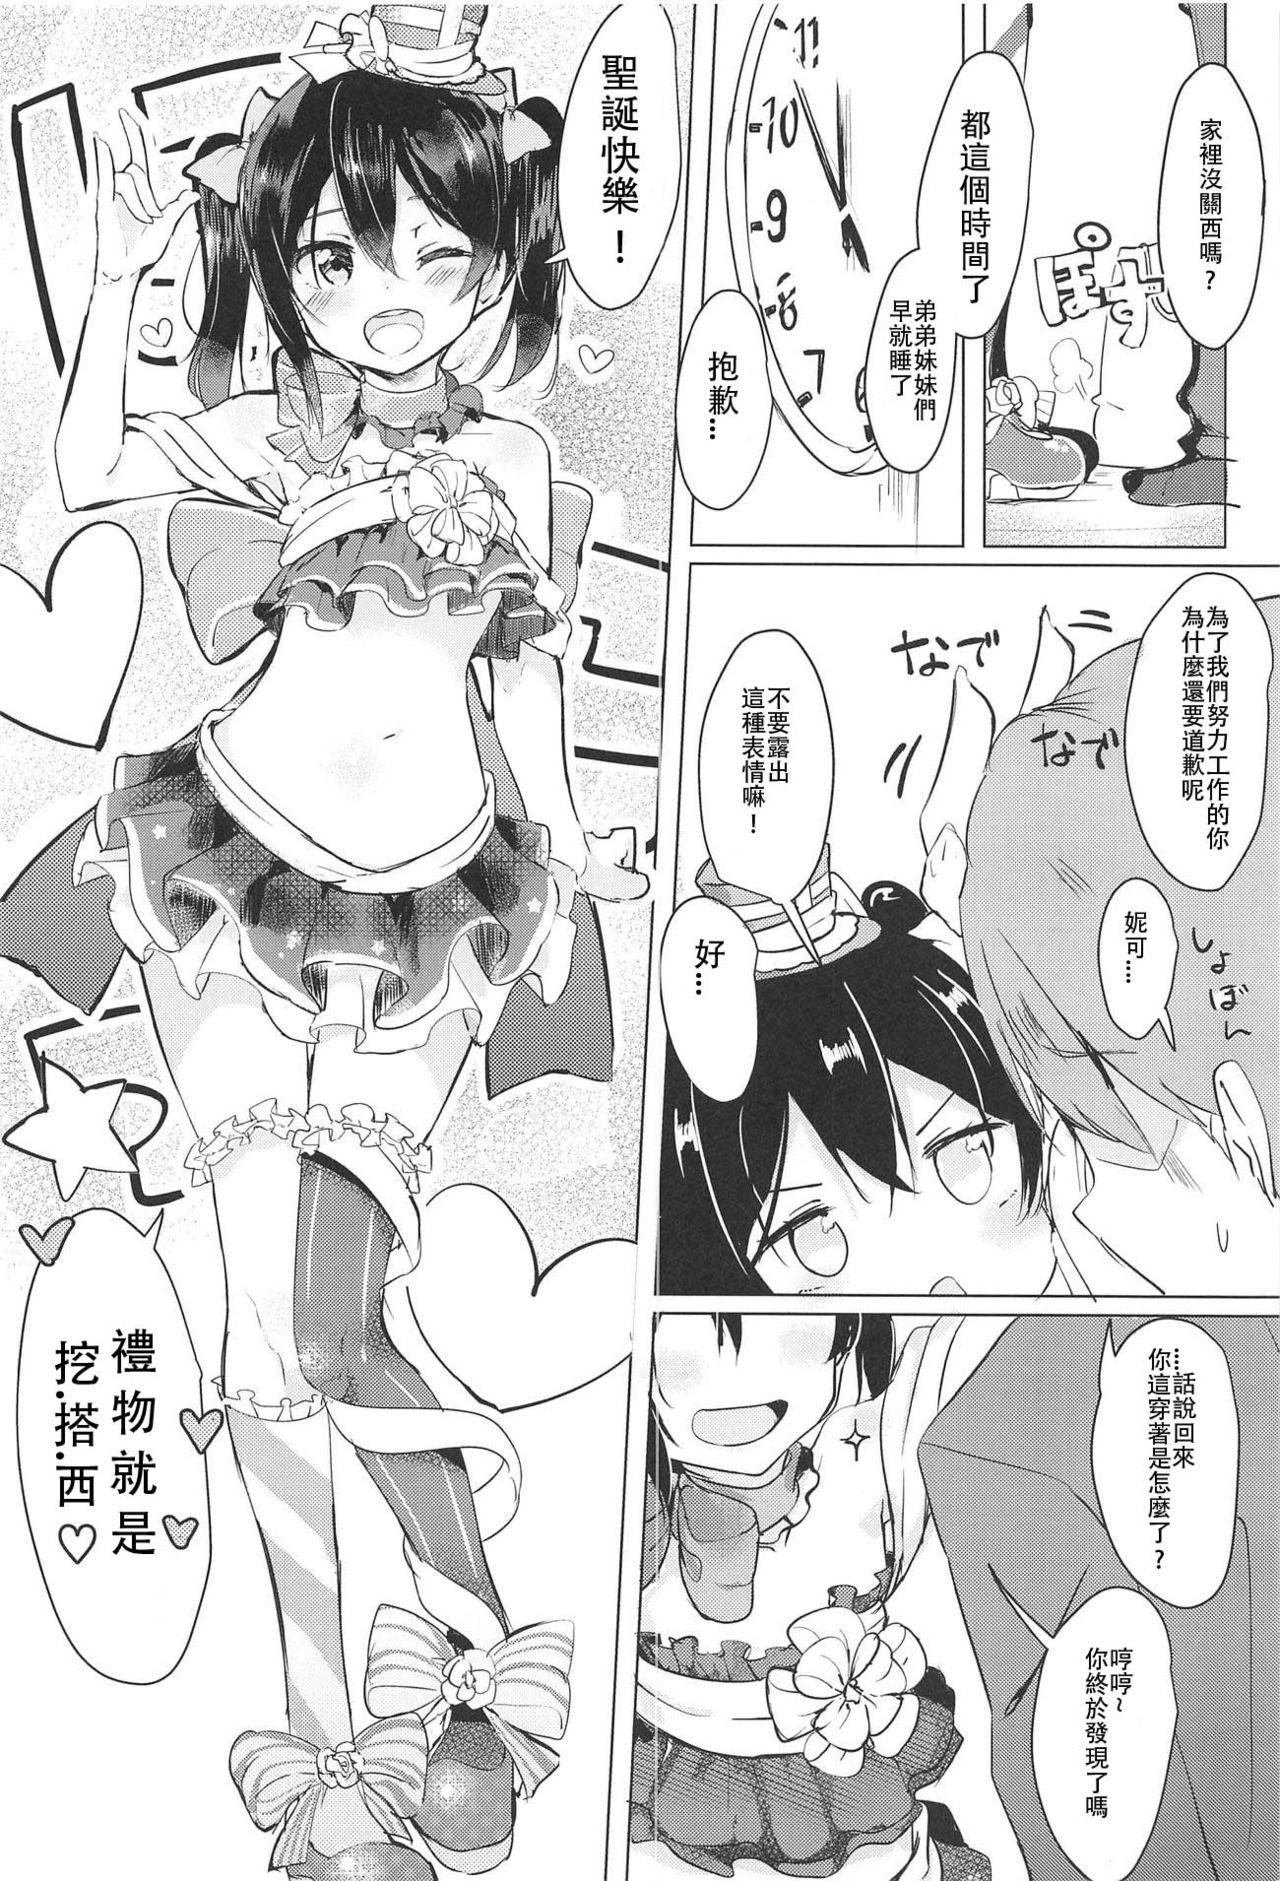 Scandal Smile for you. - Love live Gay Pawnshop - Page 4